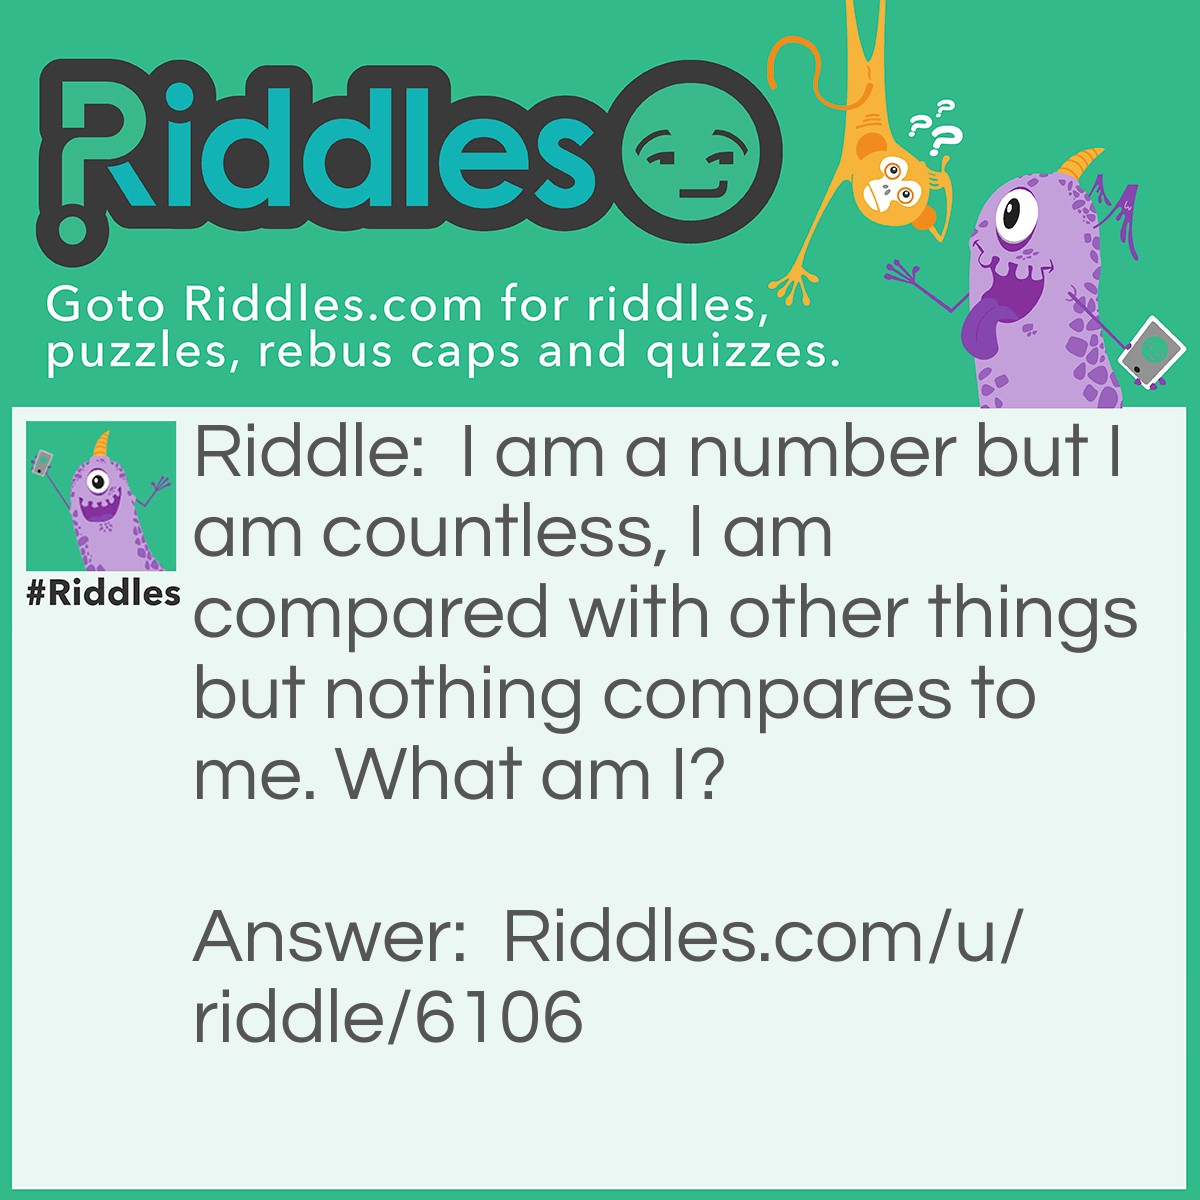 Riddle: I am a number but I am countless, I am compared with other things but nothing compares to me. What am I? Answer: Infinity.........